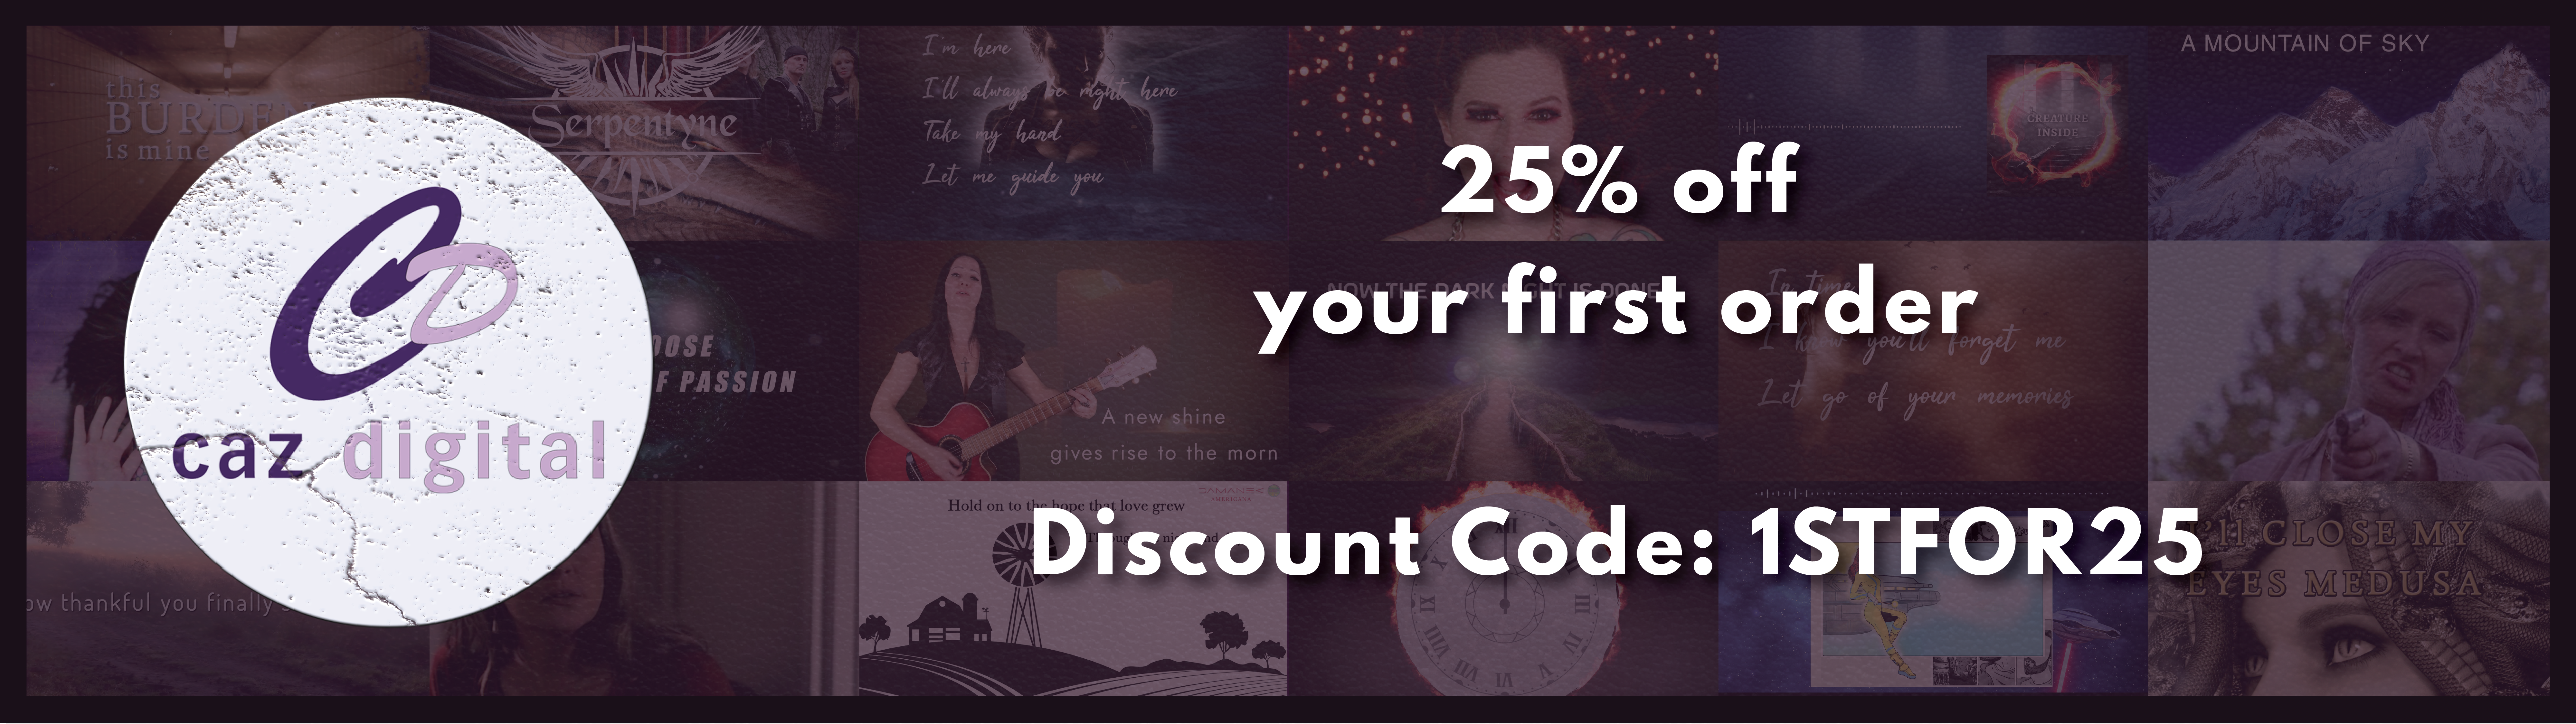 25% off your first order